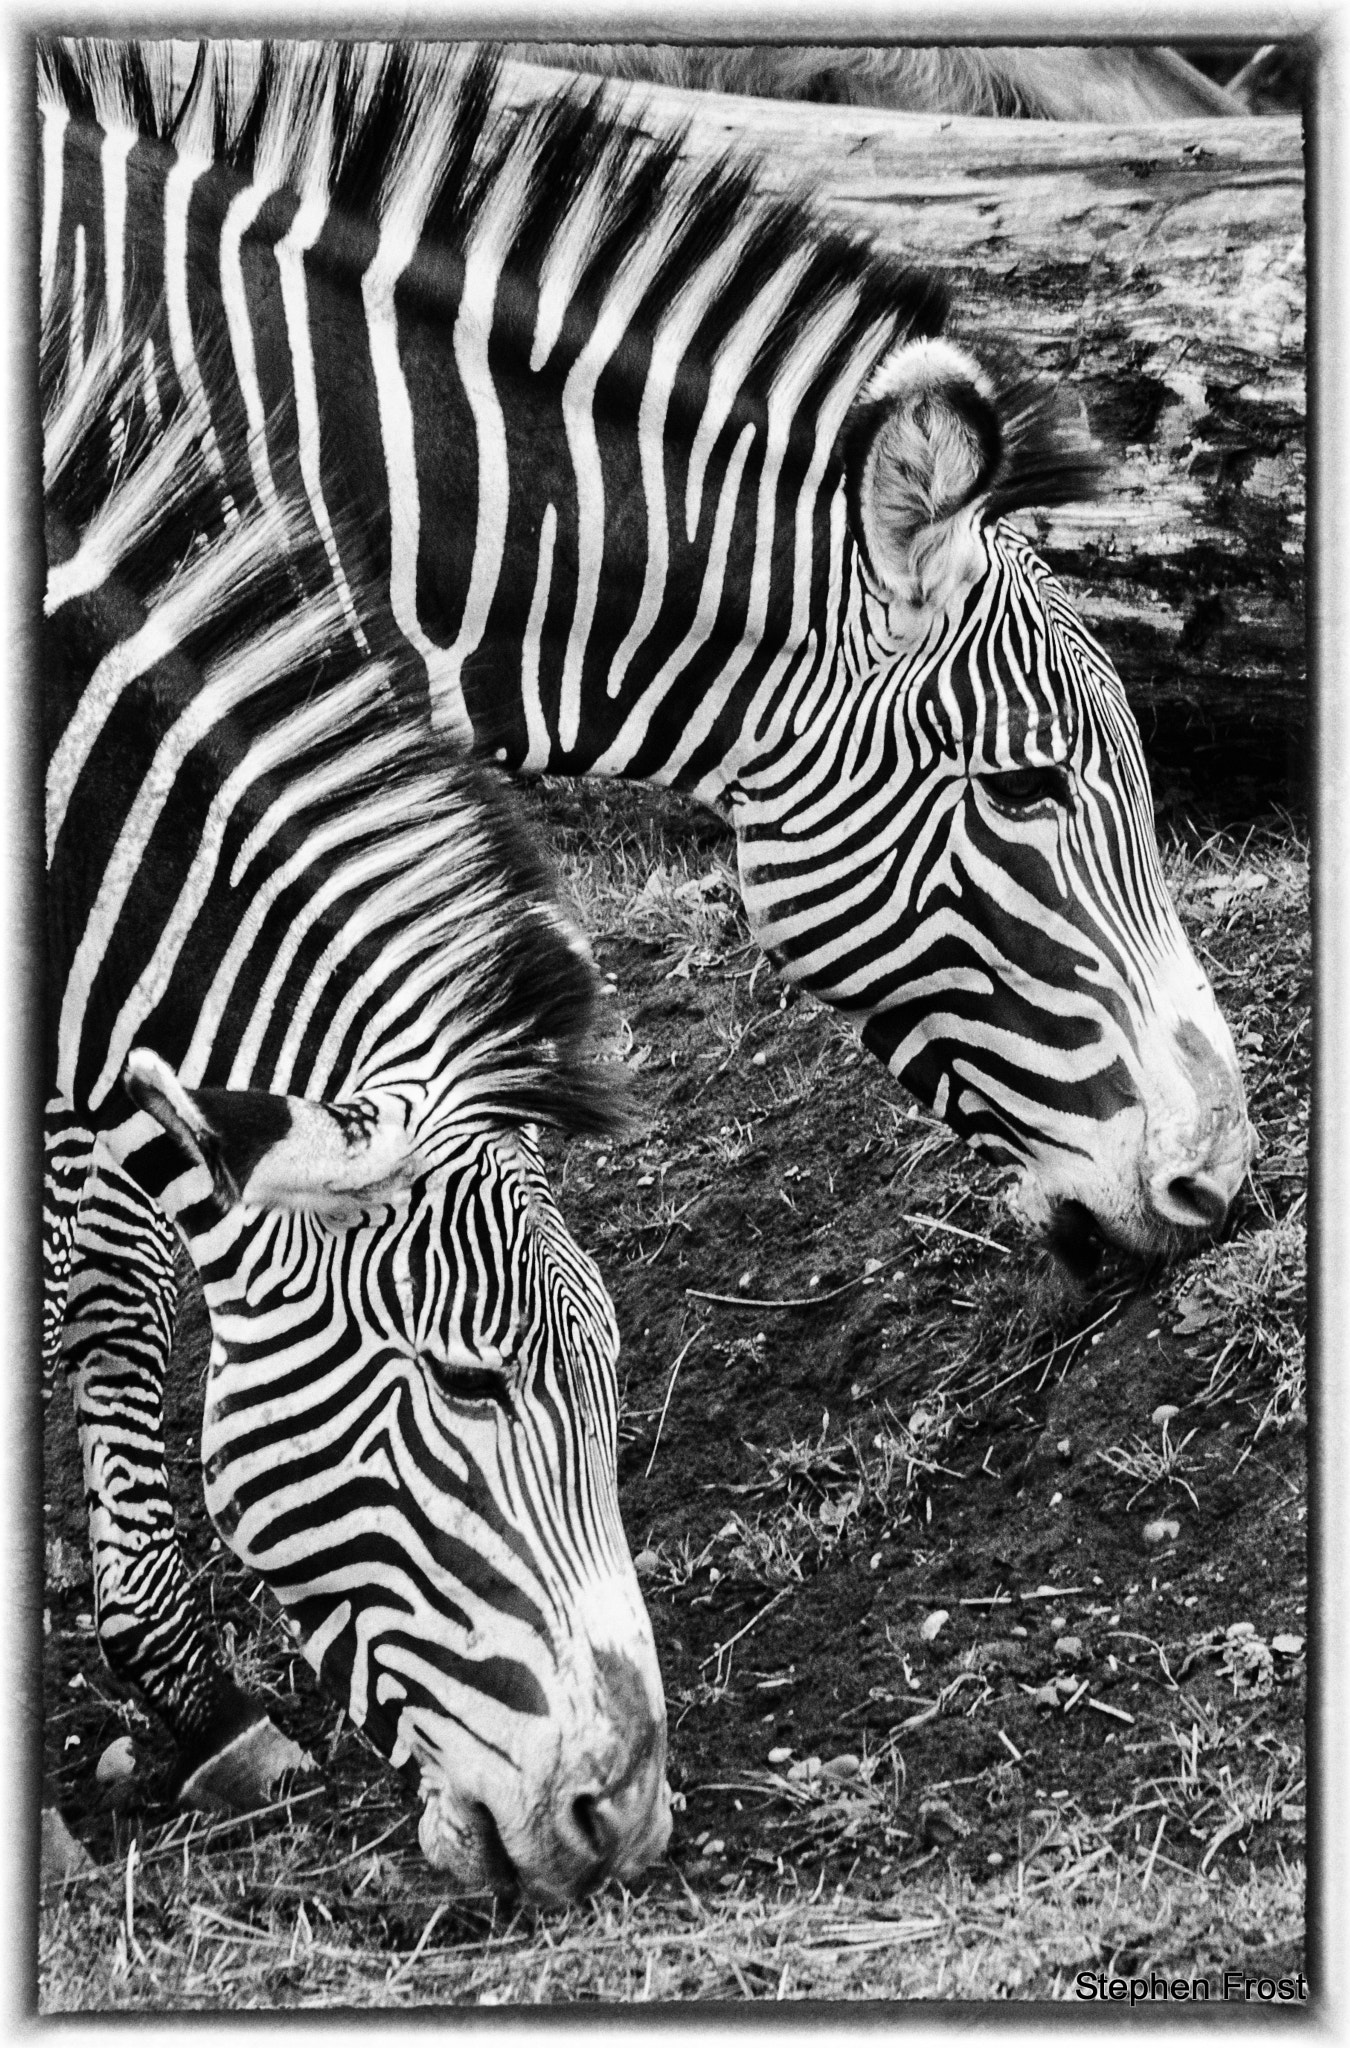 Olympus PEN E-PL5 sample photo. Seeing double : pair of zebras @ yorkshire wildlife park , doncaster uk photography